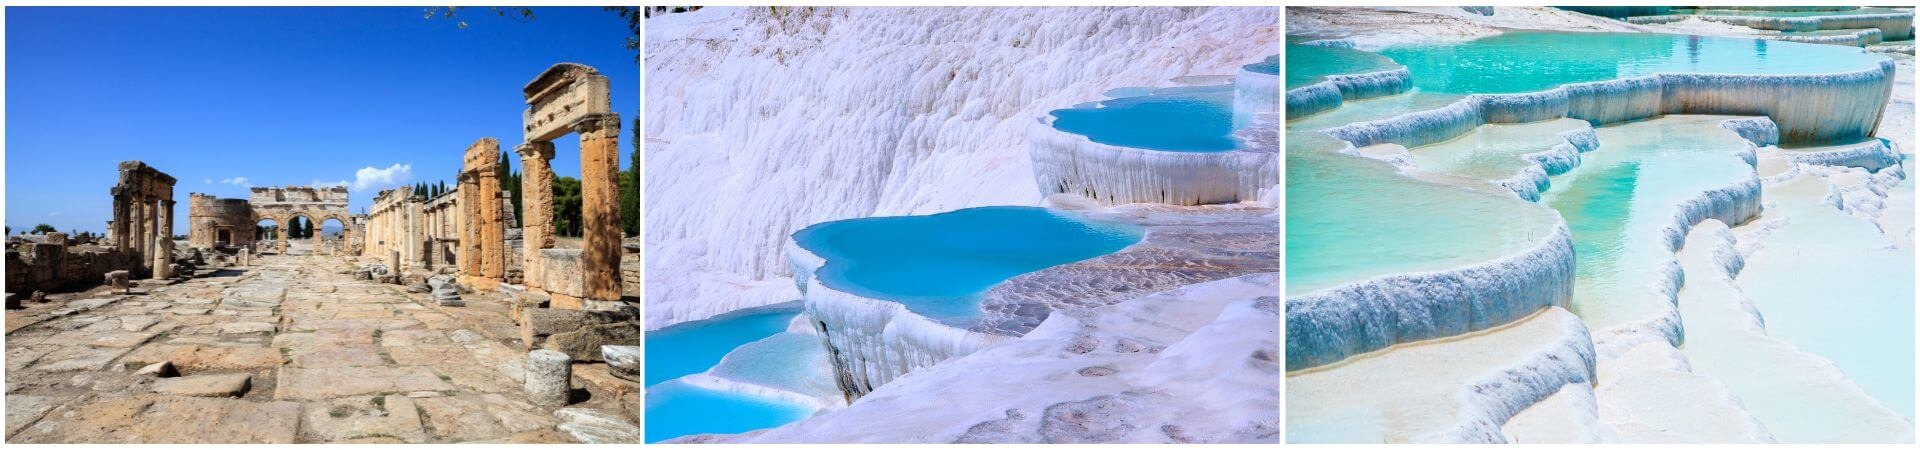 Pamukkale Tours From Istanbul (Discounted)